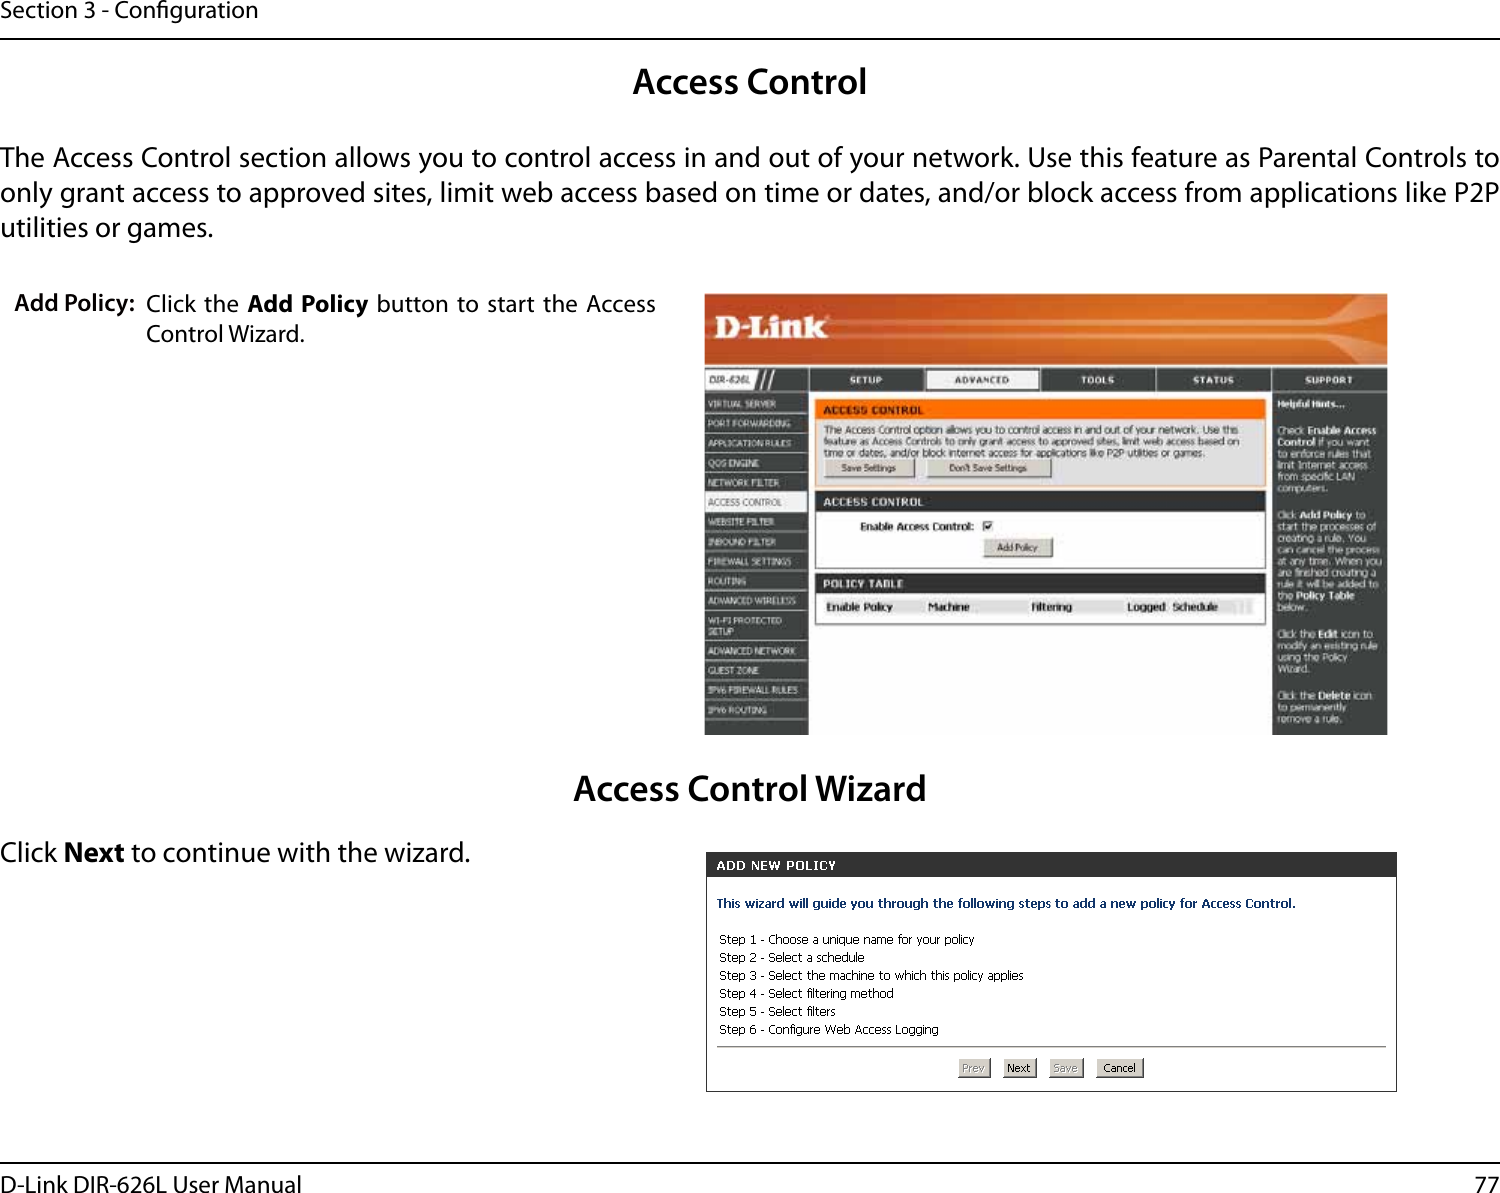 77D-Link DIR-626L User ManualSection 3 - CongurationAccess ControlClick the  Add Policy button to start the  Access Control Wizard. Add Policy:The Access Control section allows you to control access in and out of your network. Use this feature as Parental Controls to only grant access to approved sites, limit web access based on time or dates, and/or block access from applications like P2P utilities or games.Click Next to continue with the wizard.Access Control Wizard